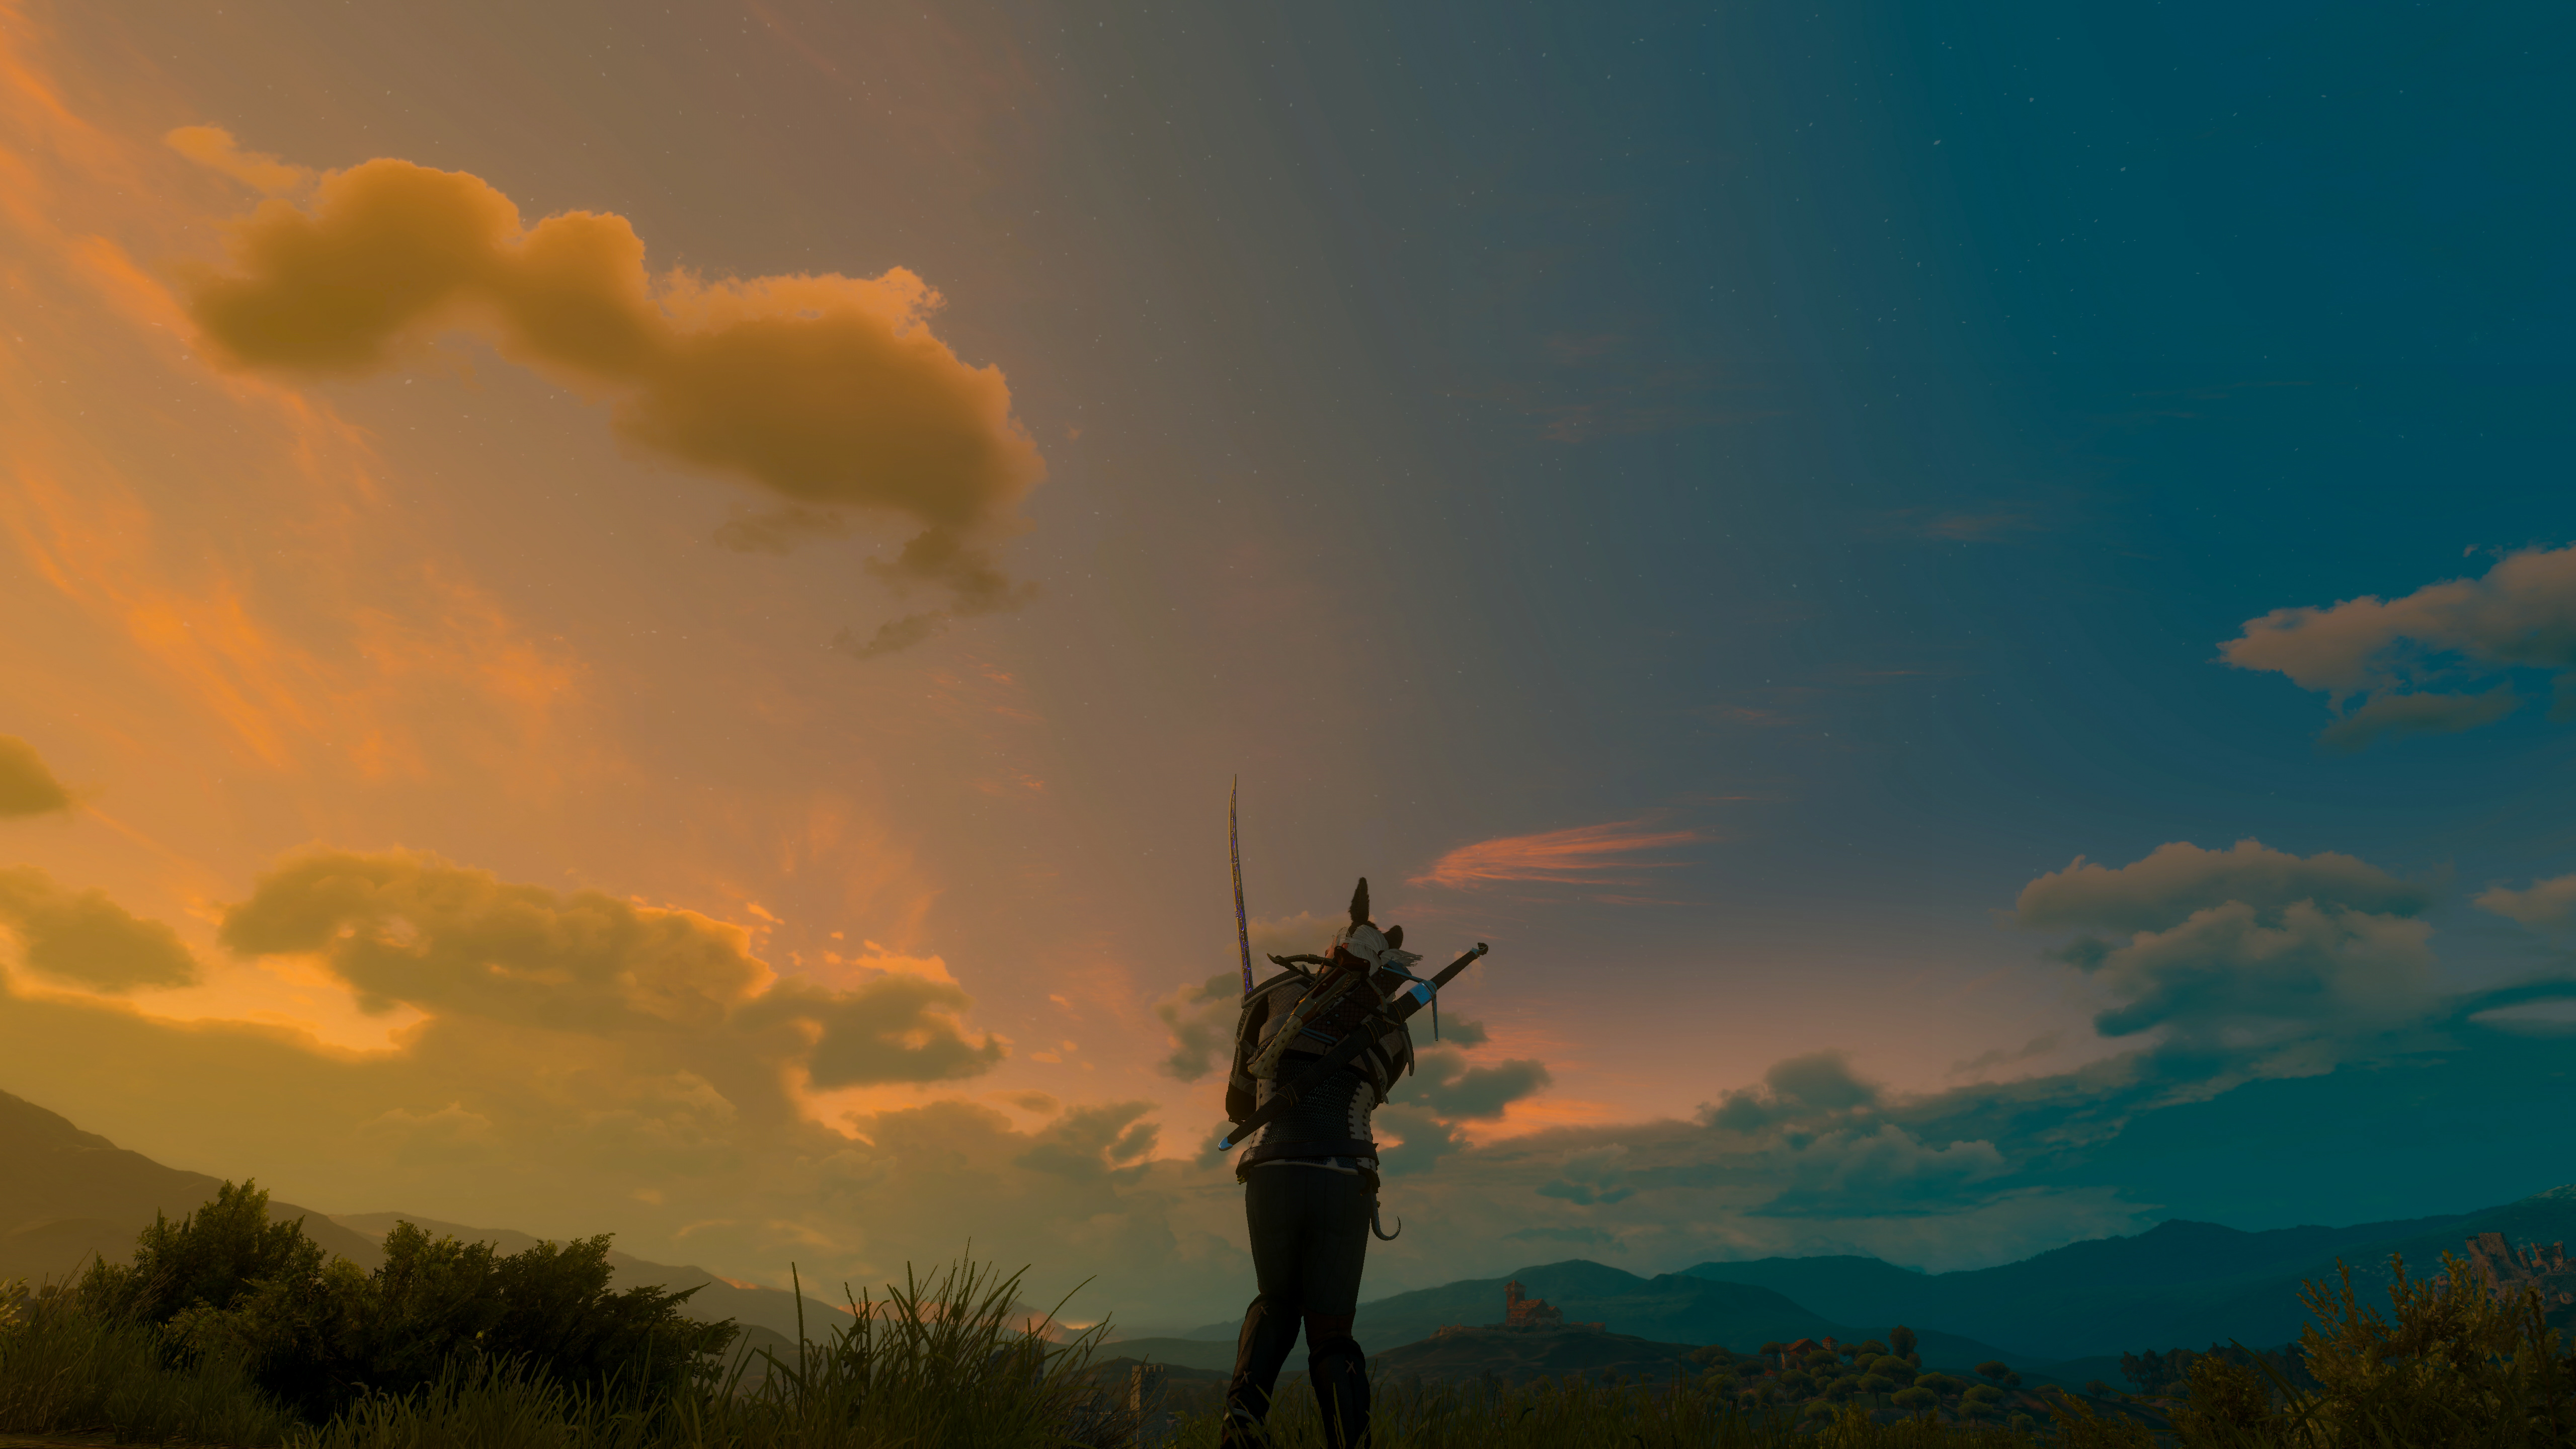 The Witcher 3 Wild Hunt Geralt Of Rivia Video Games PC Gaming RPG Screen Shot 5120x2880